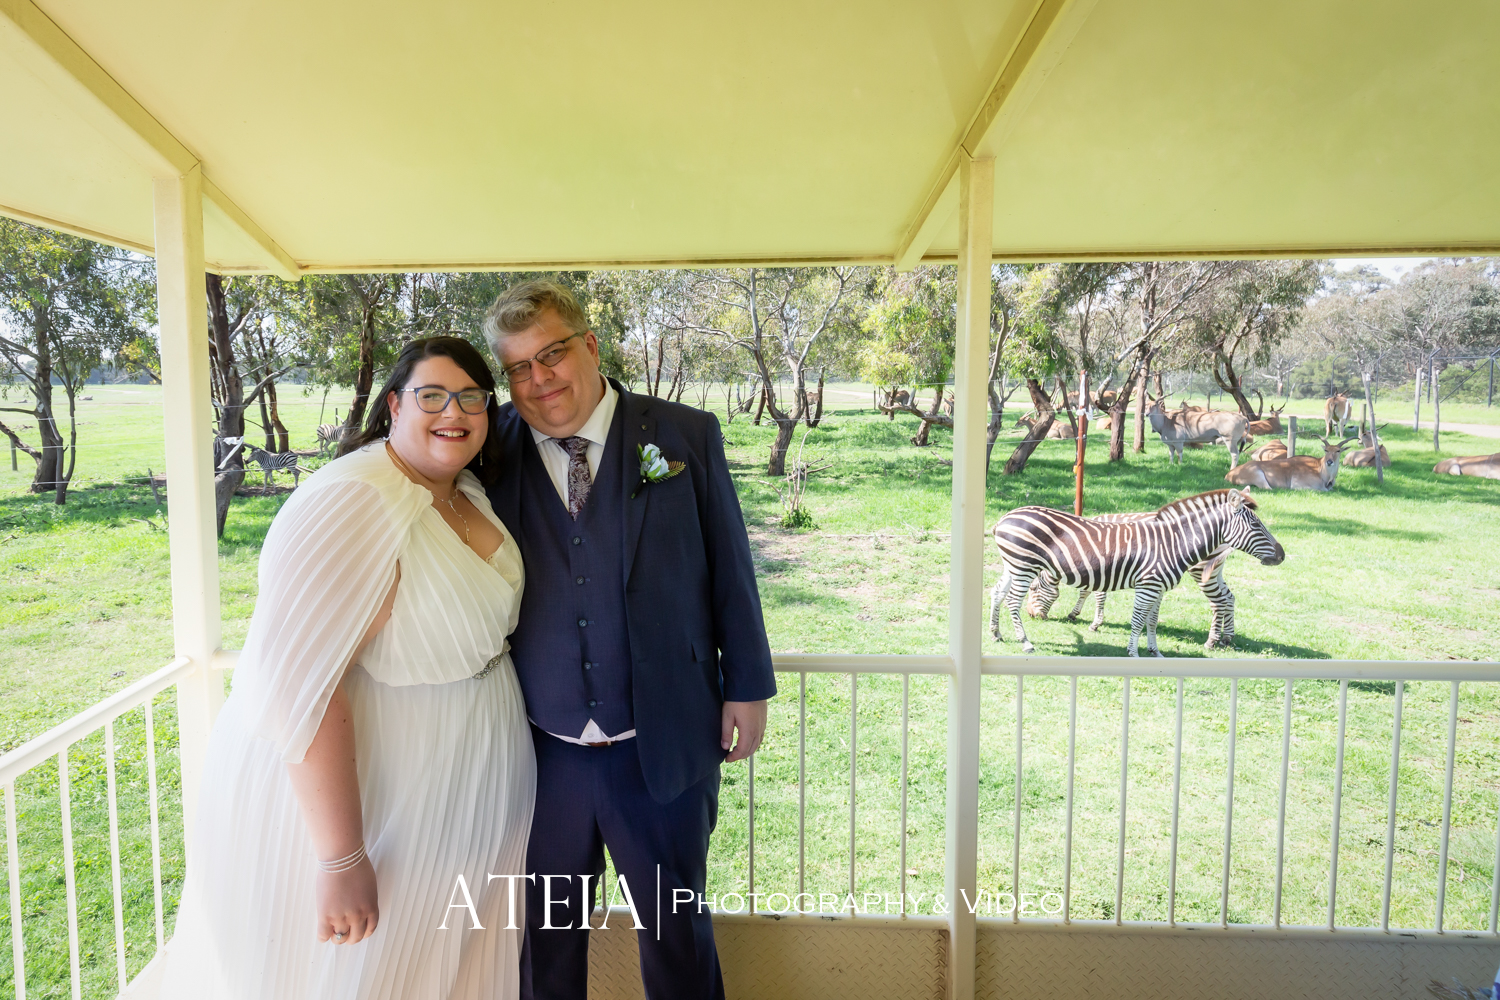 , Nicole and Brenton&#8217;s wedding photography at Werribee Zoo captured by ATEIA Photography &#038; Video